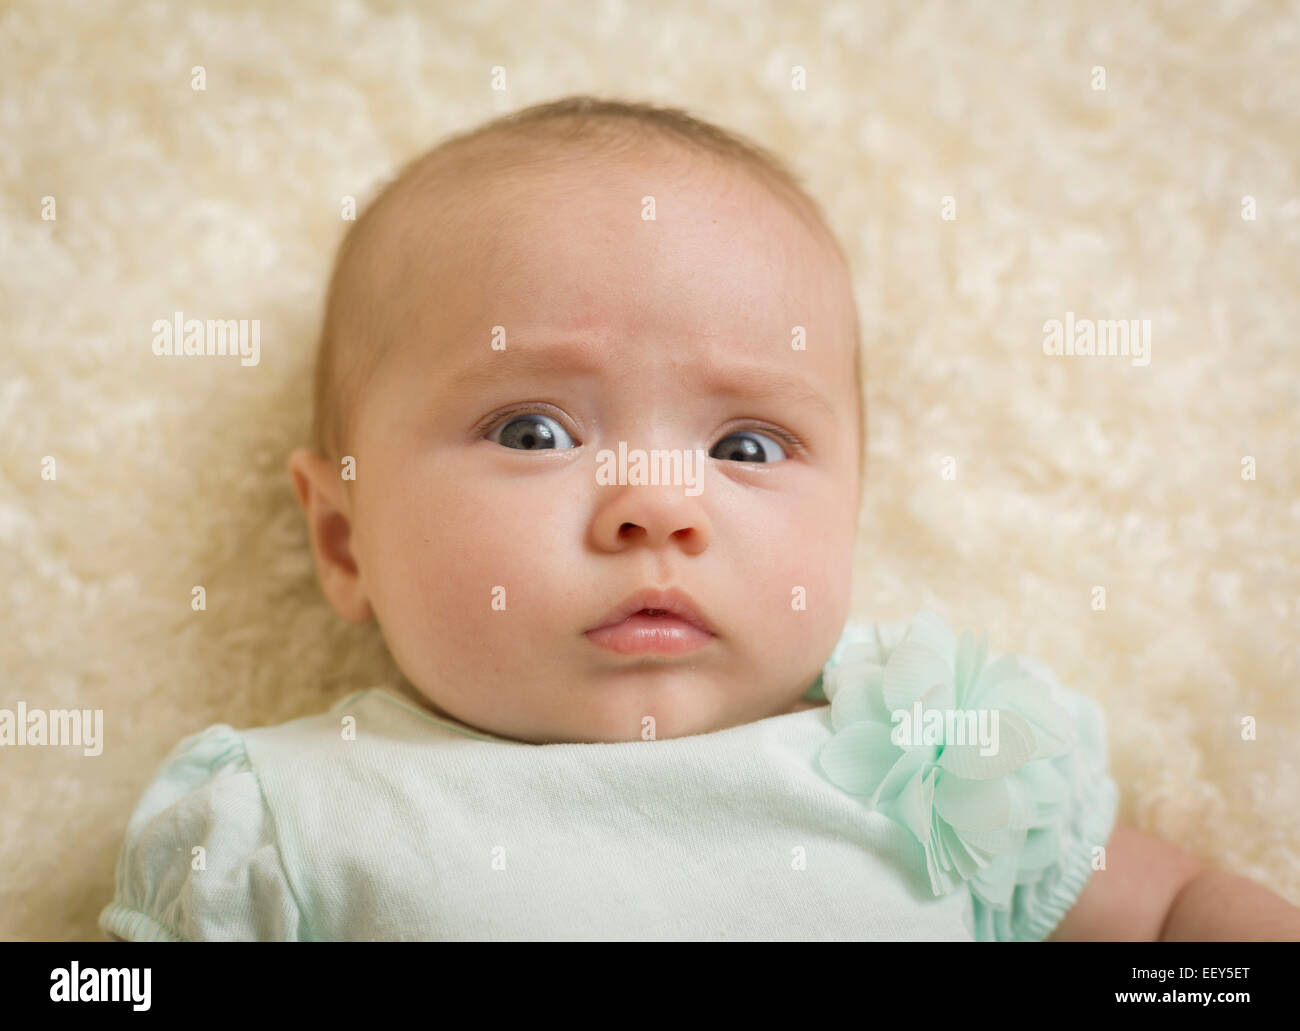 Three month old baby girl staring at camera and looking worried Stock Photo